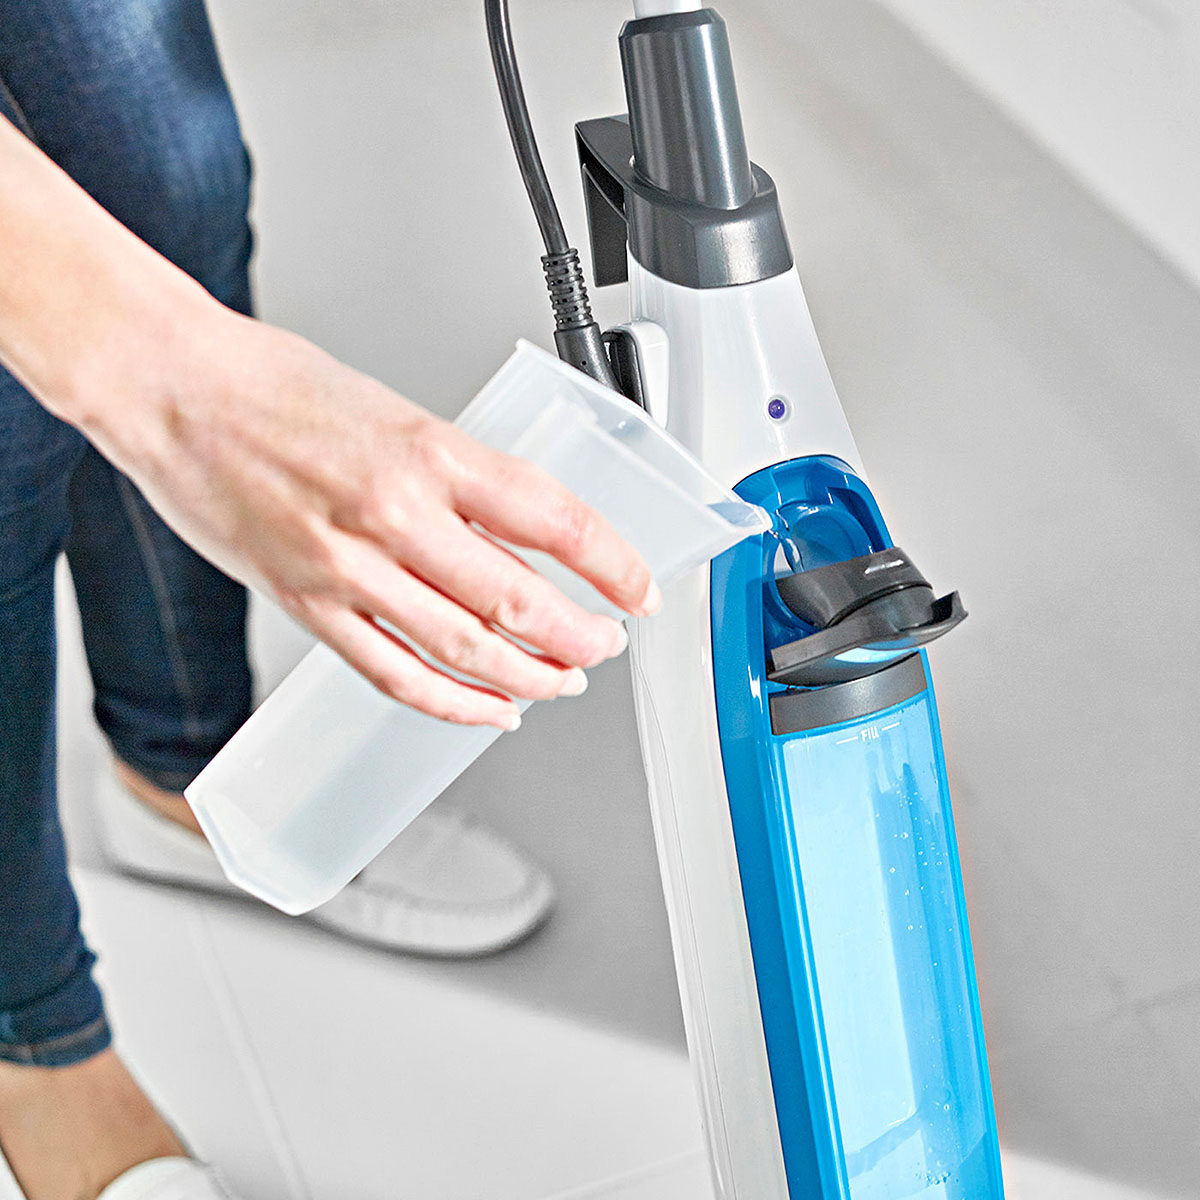 What To Put In A Steam Cleaner